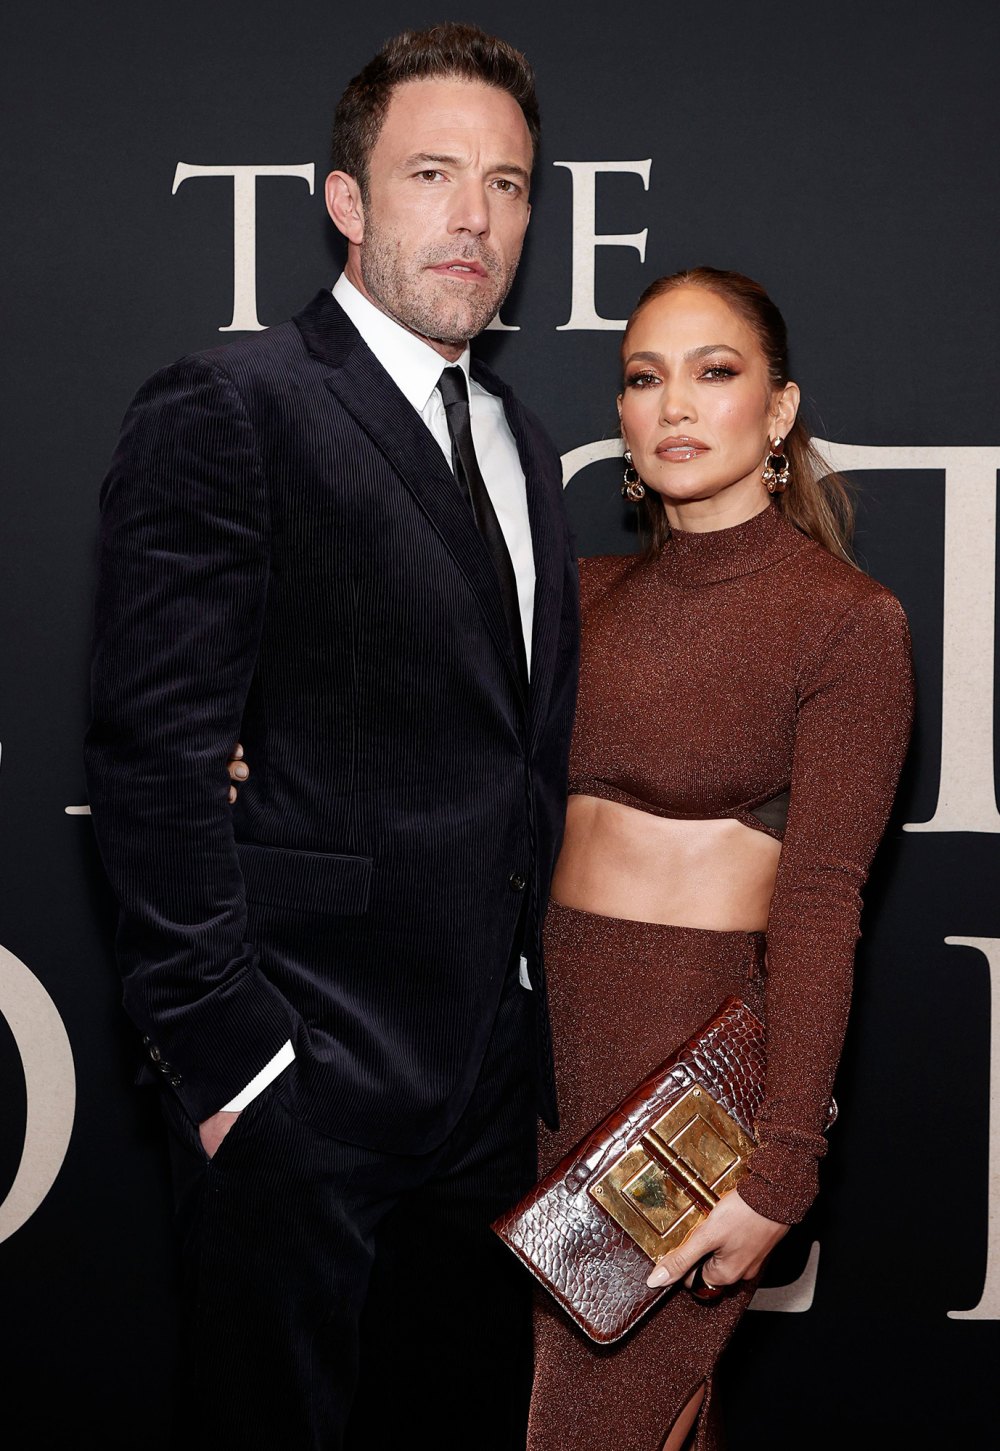 Jennifer Lopez and Ben Affleck's Biggest Differences: What They've Said, Done and More